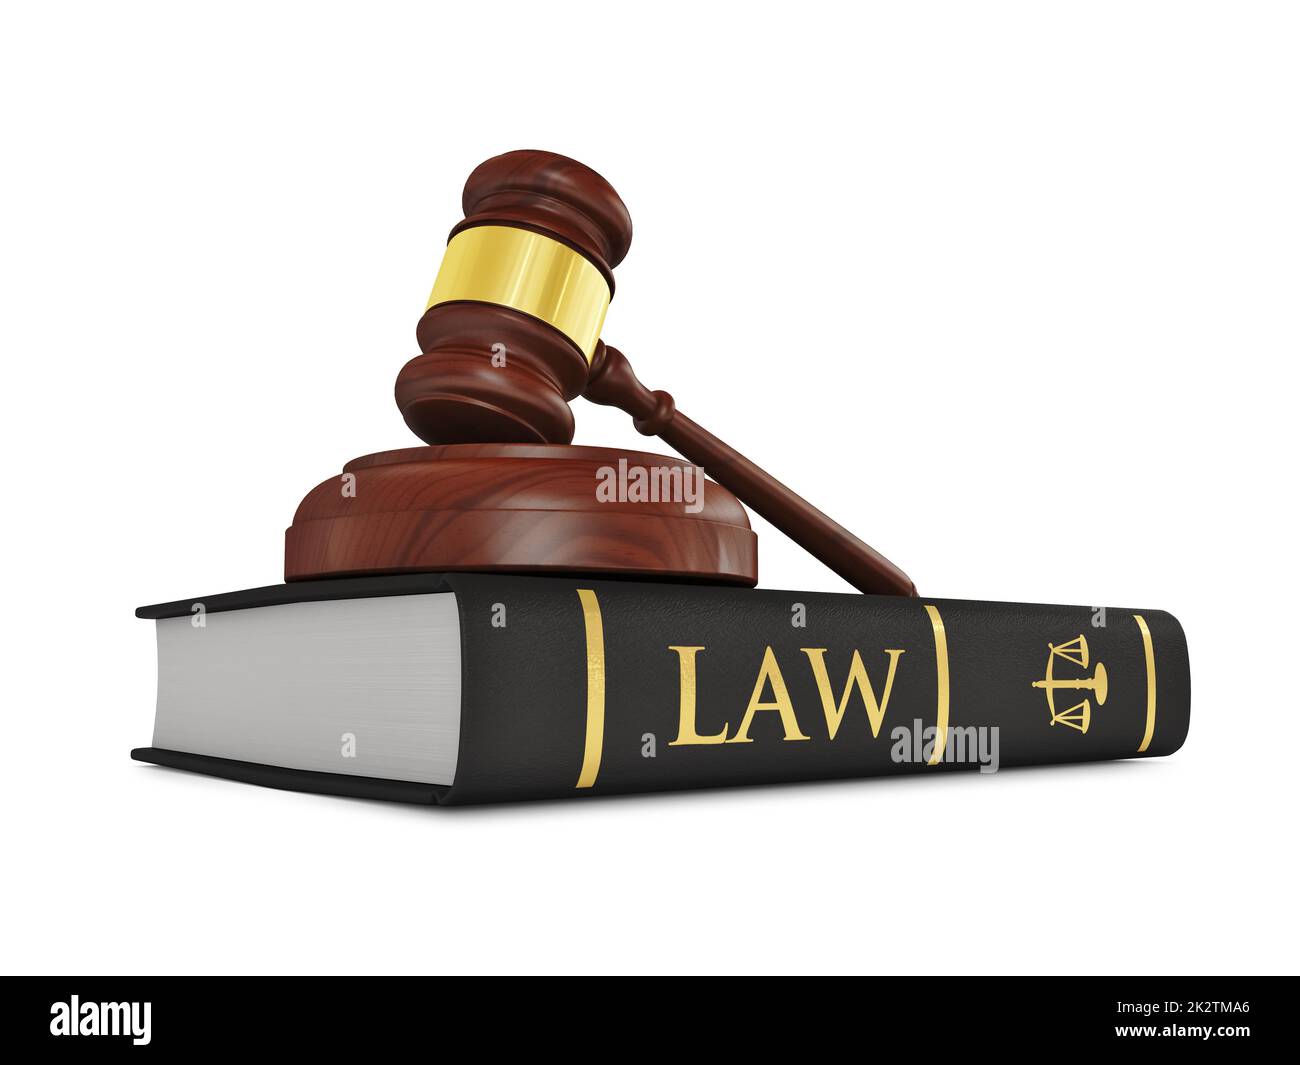 Wooden judge gavel on law book Stock Photo